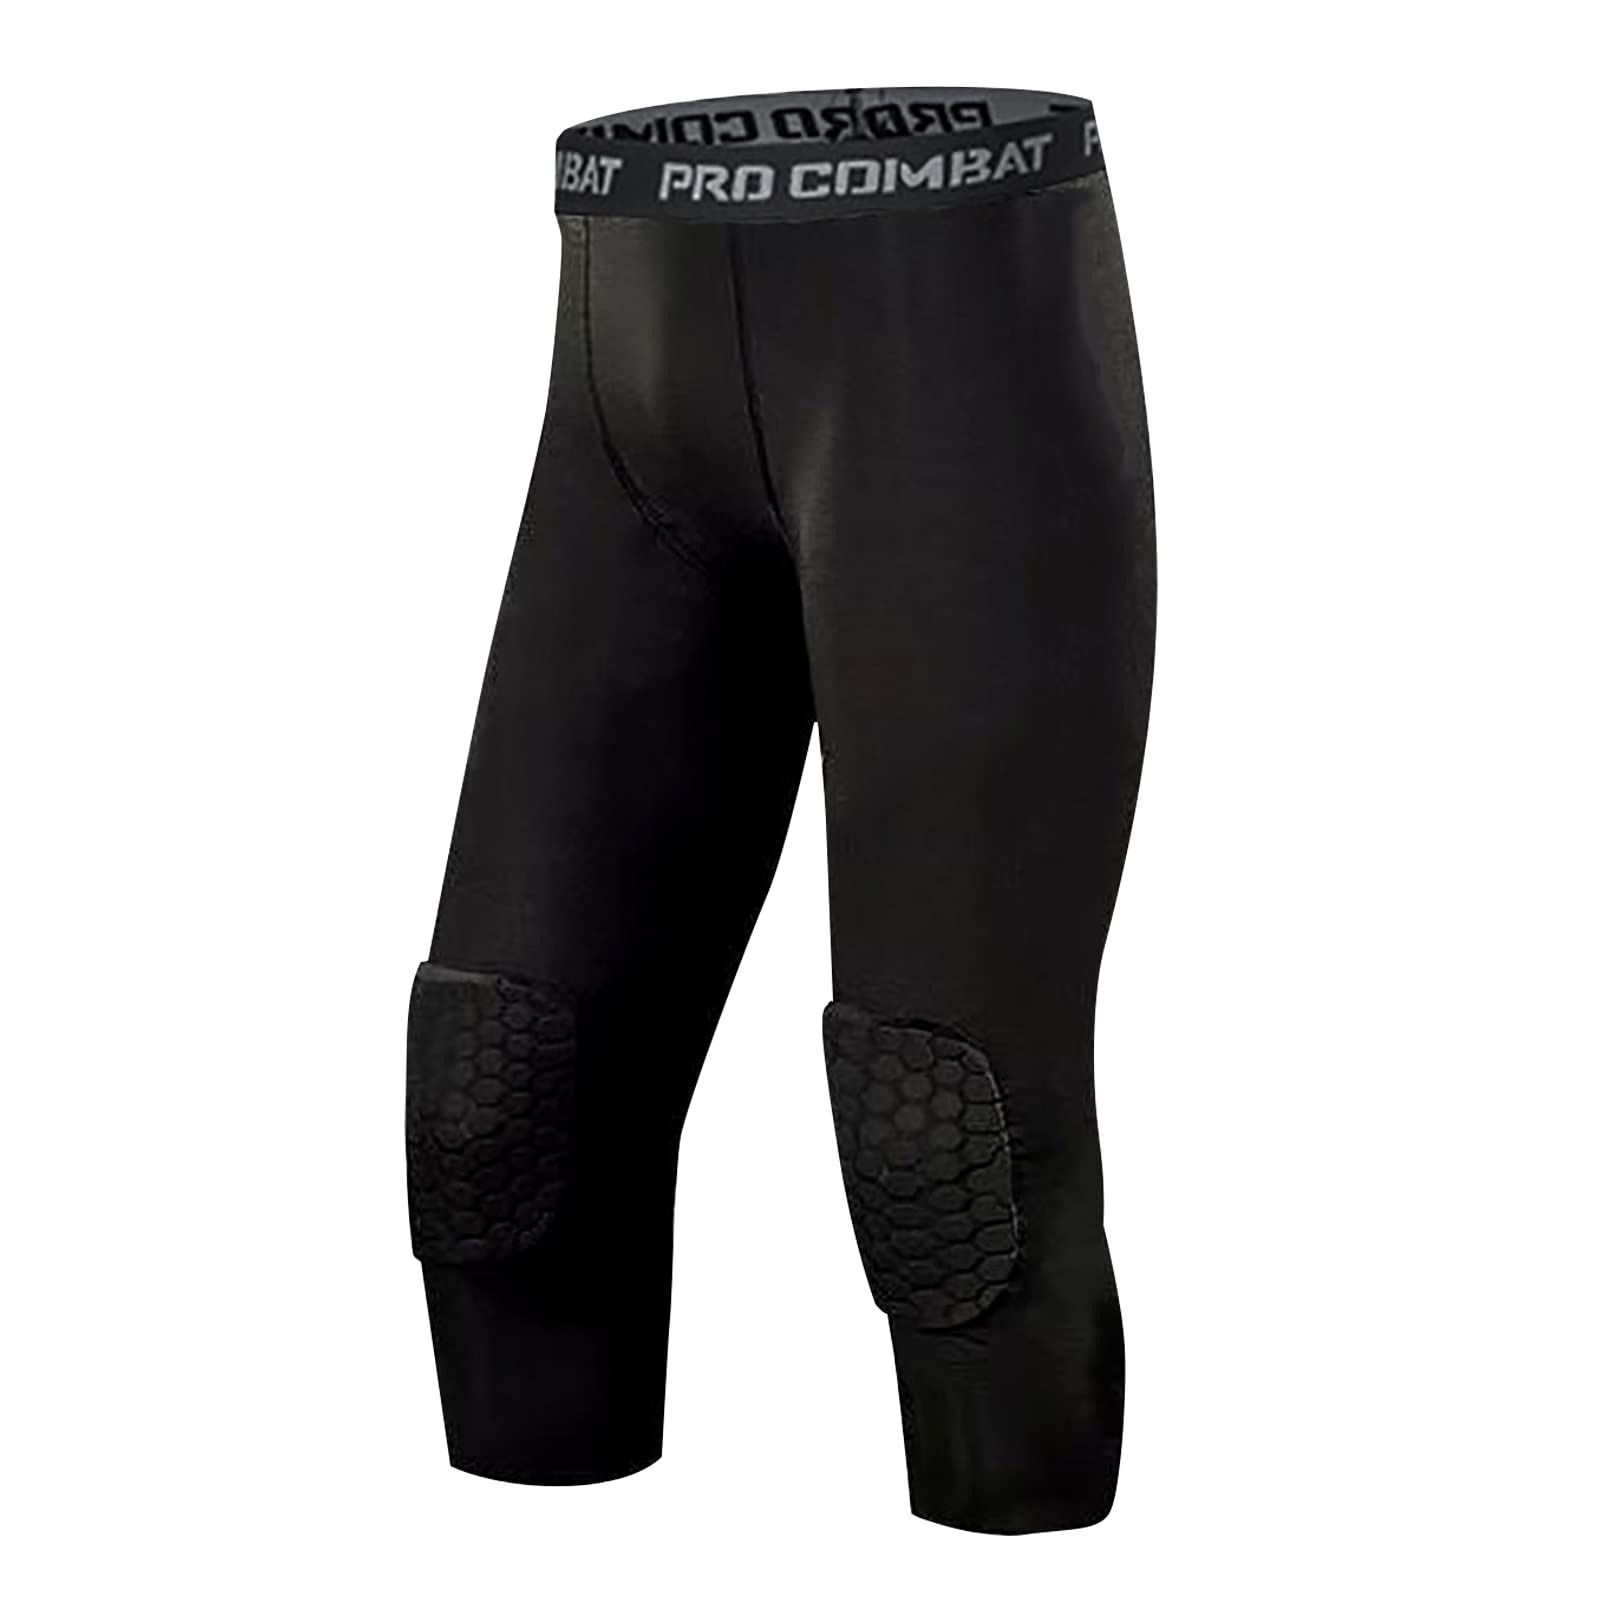  Men's Compression 3/4 Pants Athletic Baselayer Football Workout  Legging Running Tights Black : Clothing, Shoes & Jewelry